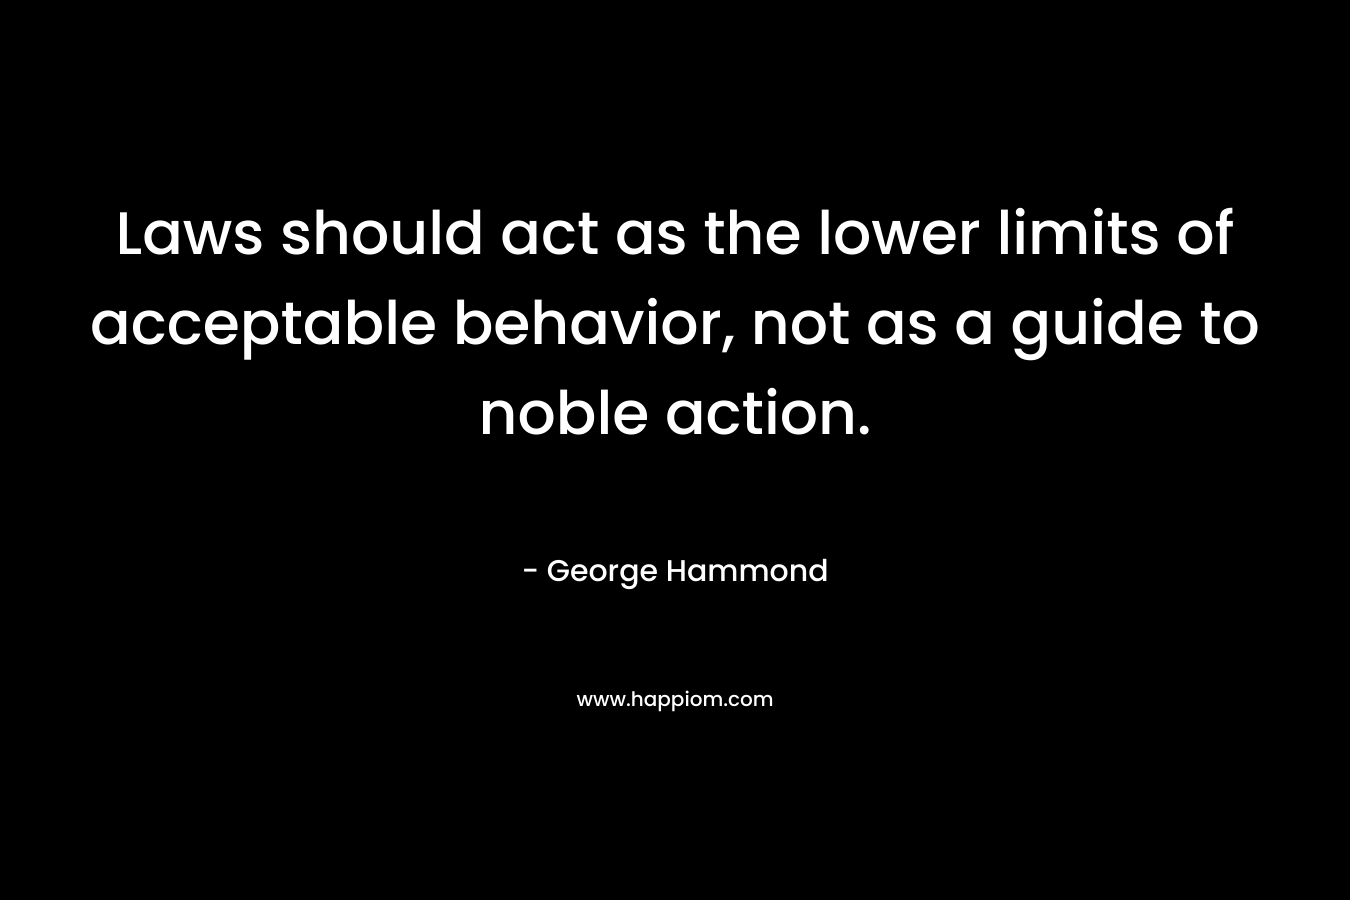 Laws should act as the lower limits of acceptable behavior, not as a guide to noble action. – George Hammond